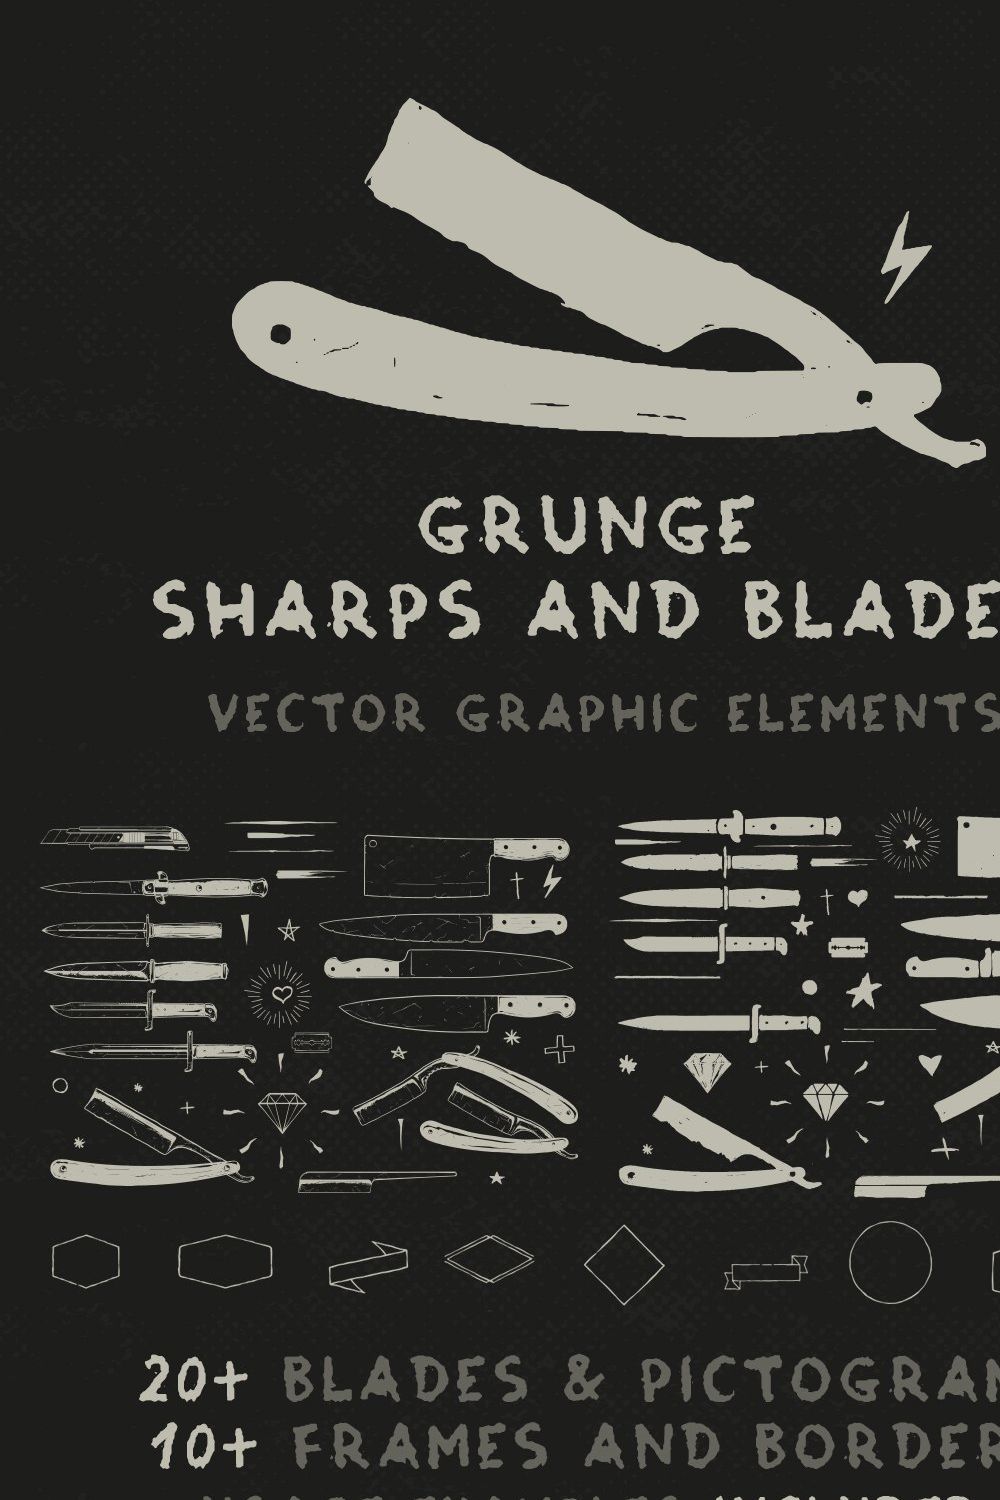 Grunge Sharps and Blades pinterest preview image.